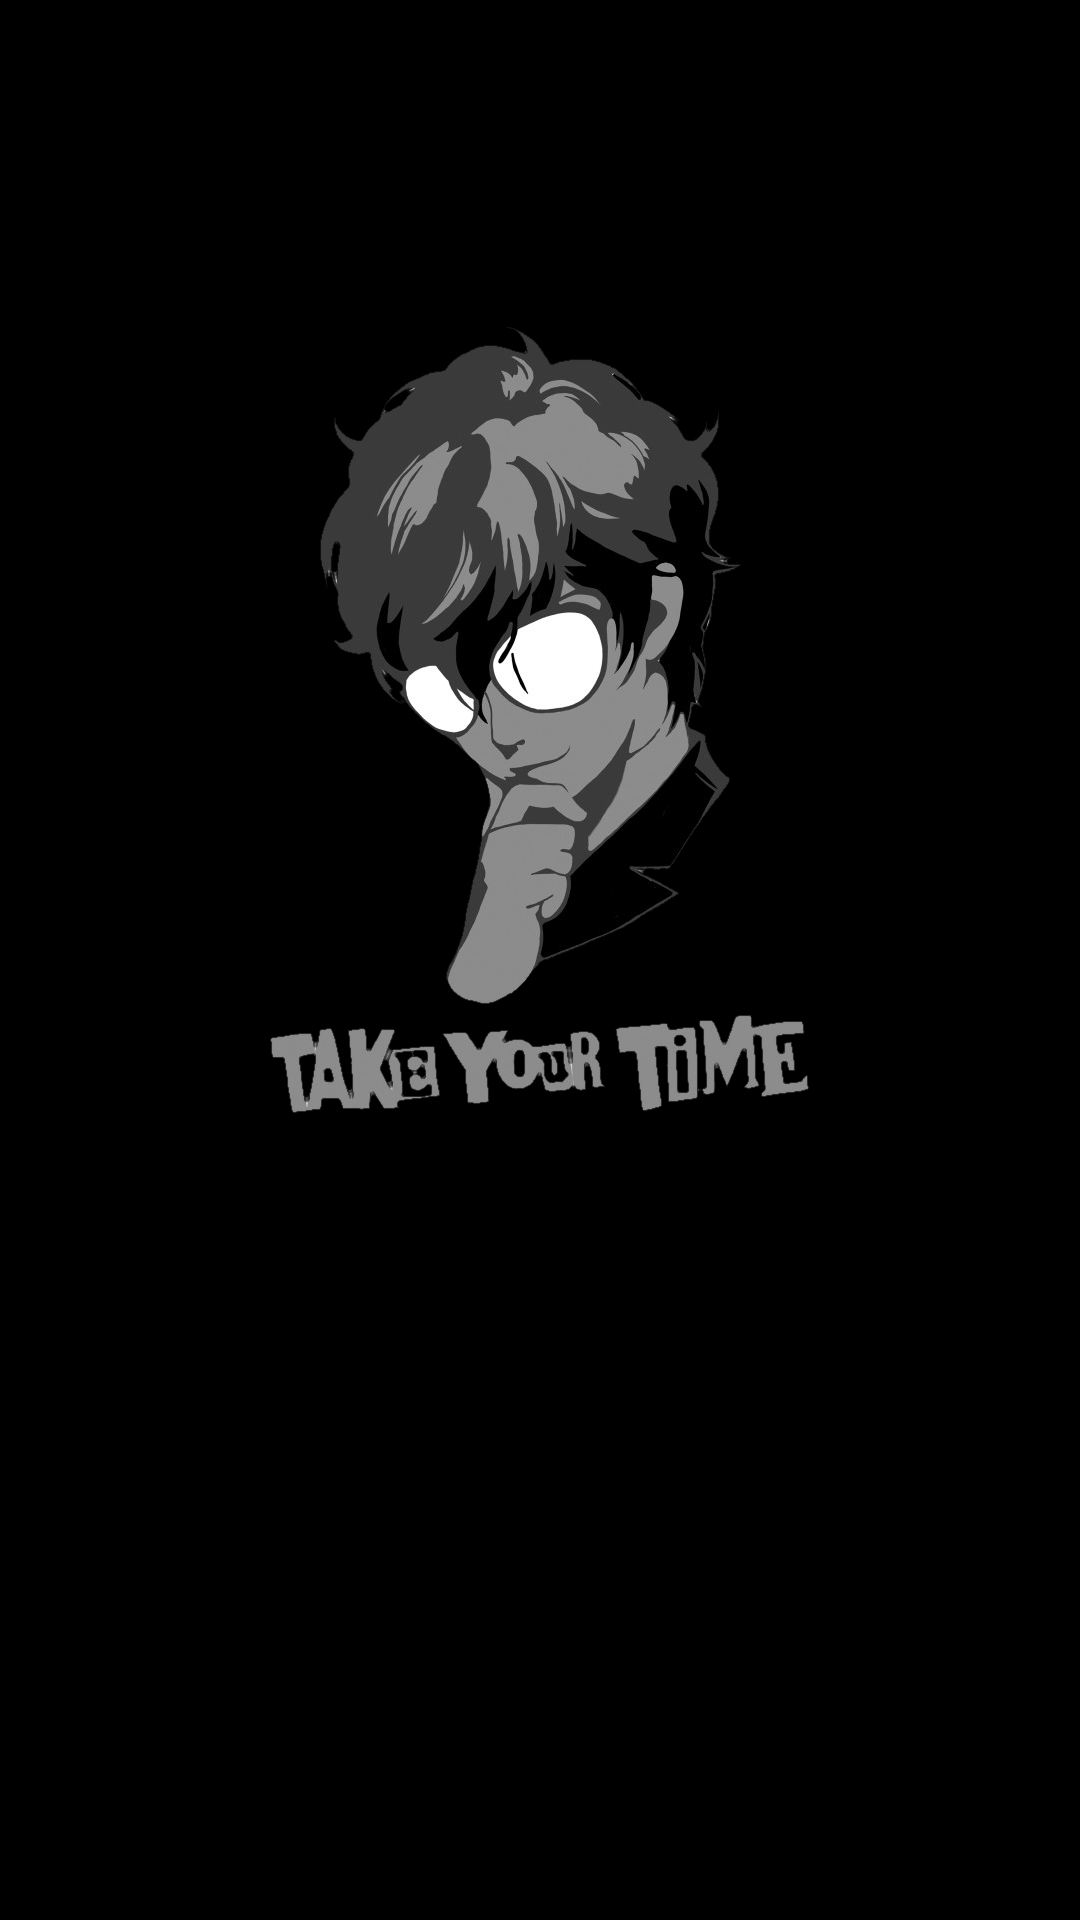 Made a simple wallpaper for amoled devices out of the take your